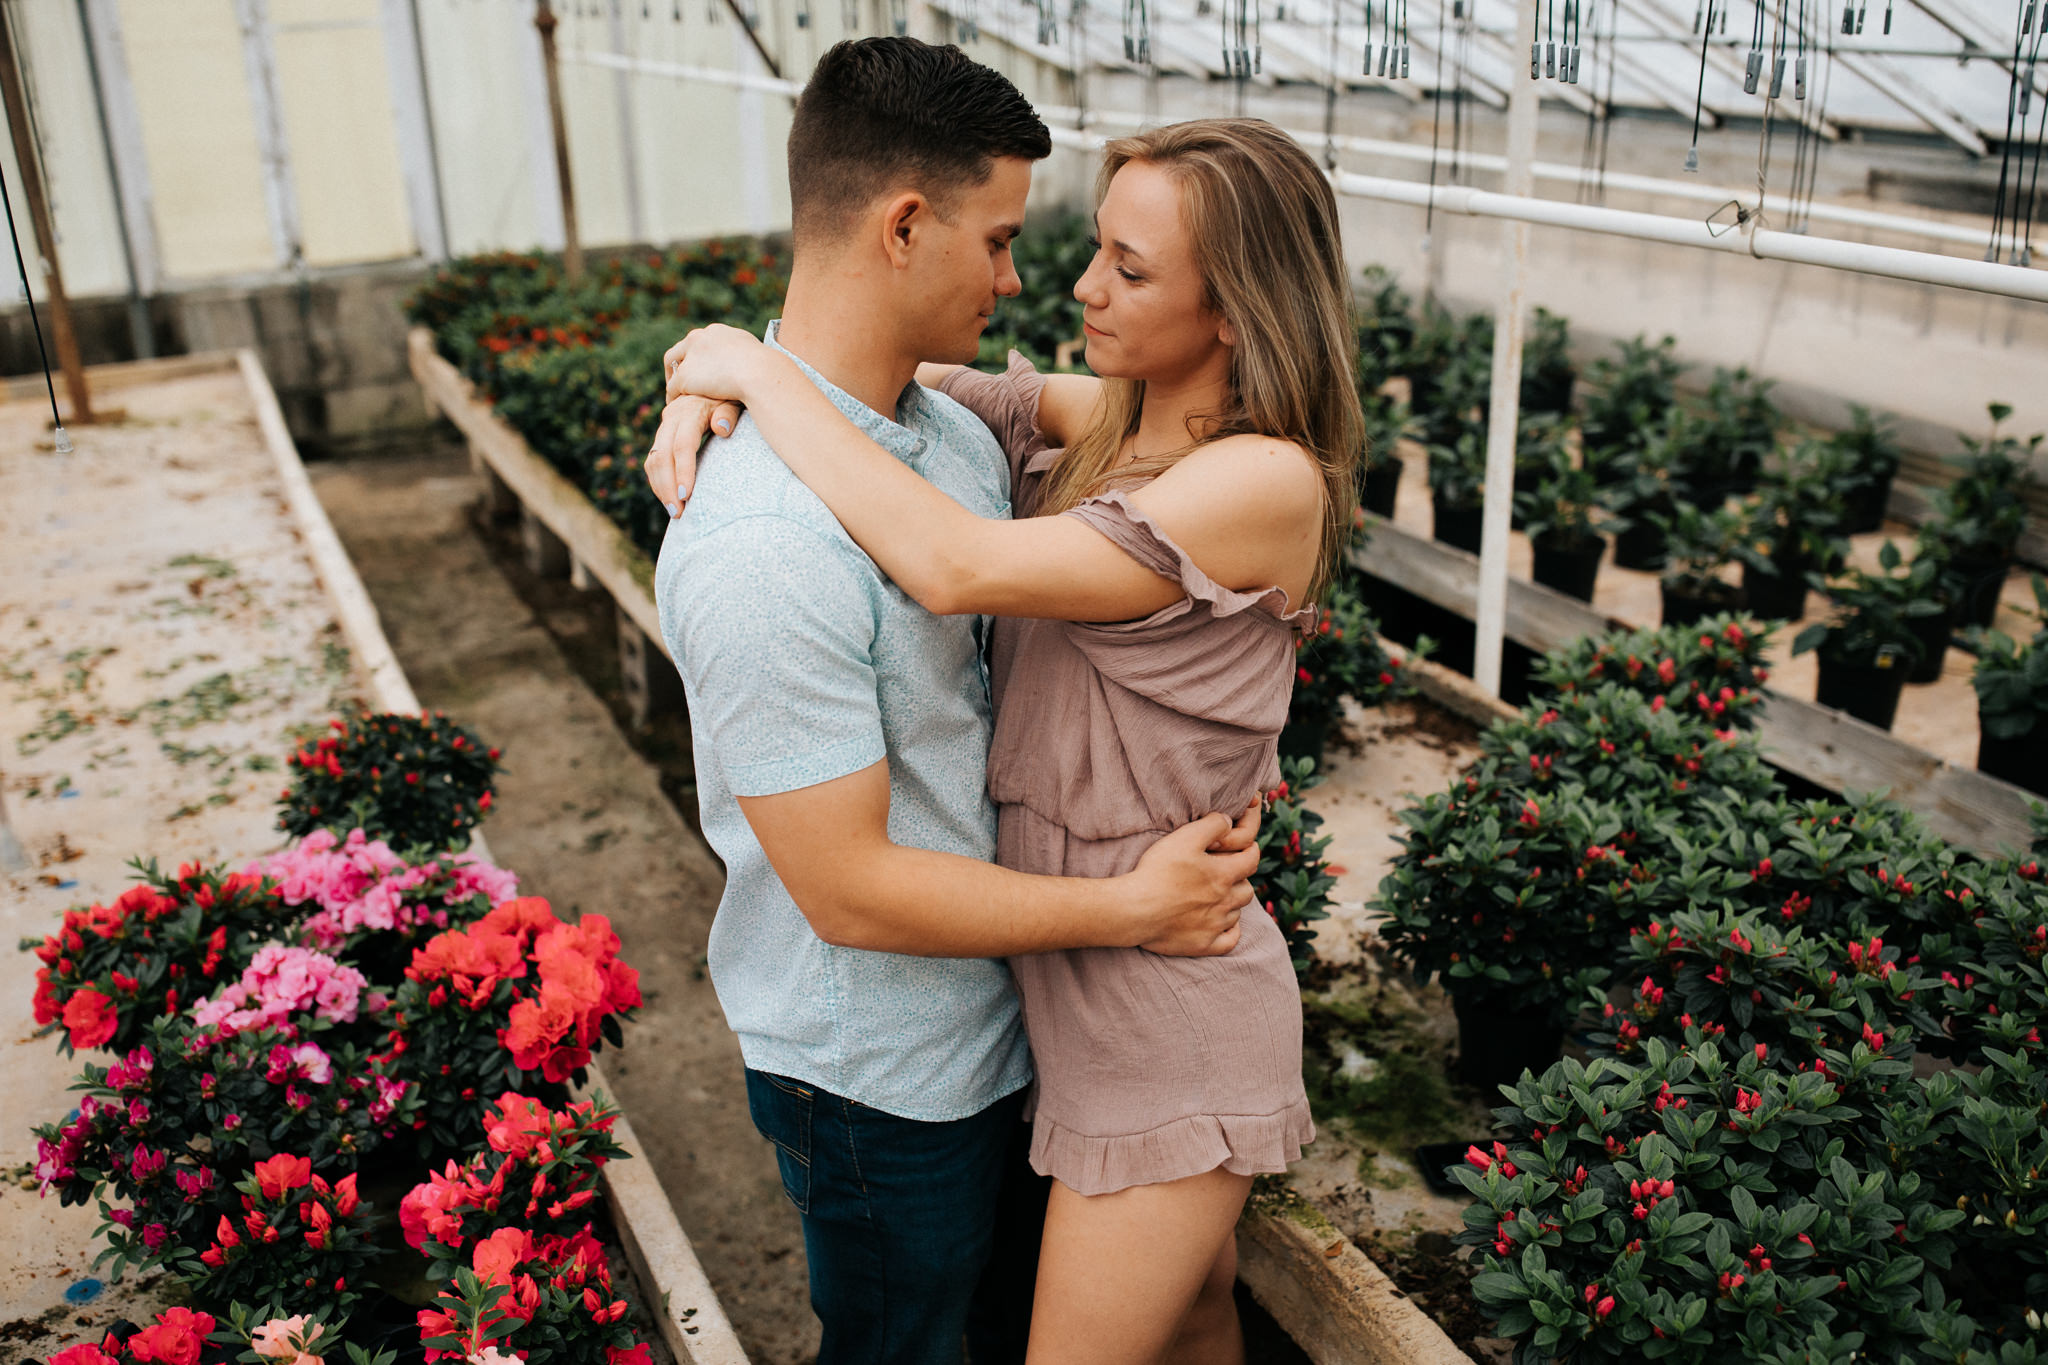 memphis-engagement-photographer-thewarmtharoundyou-greenhouse-engagement-pictures (69 of 118).jpg